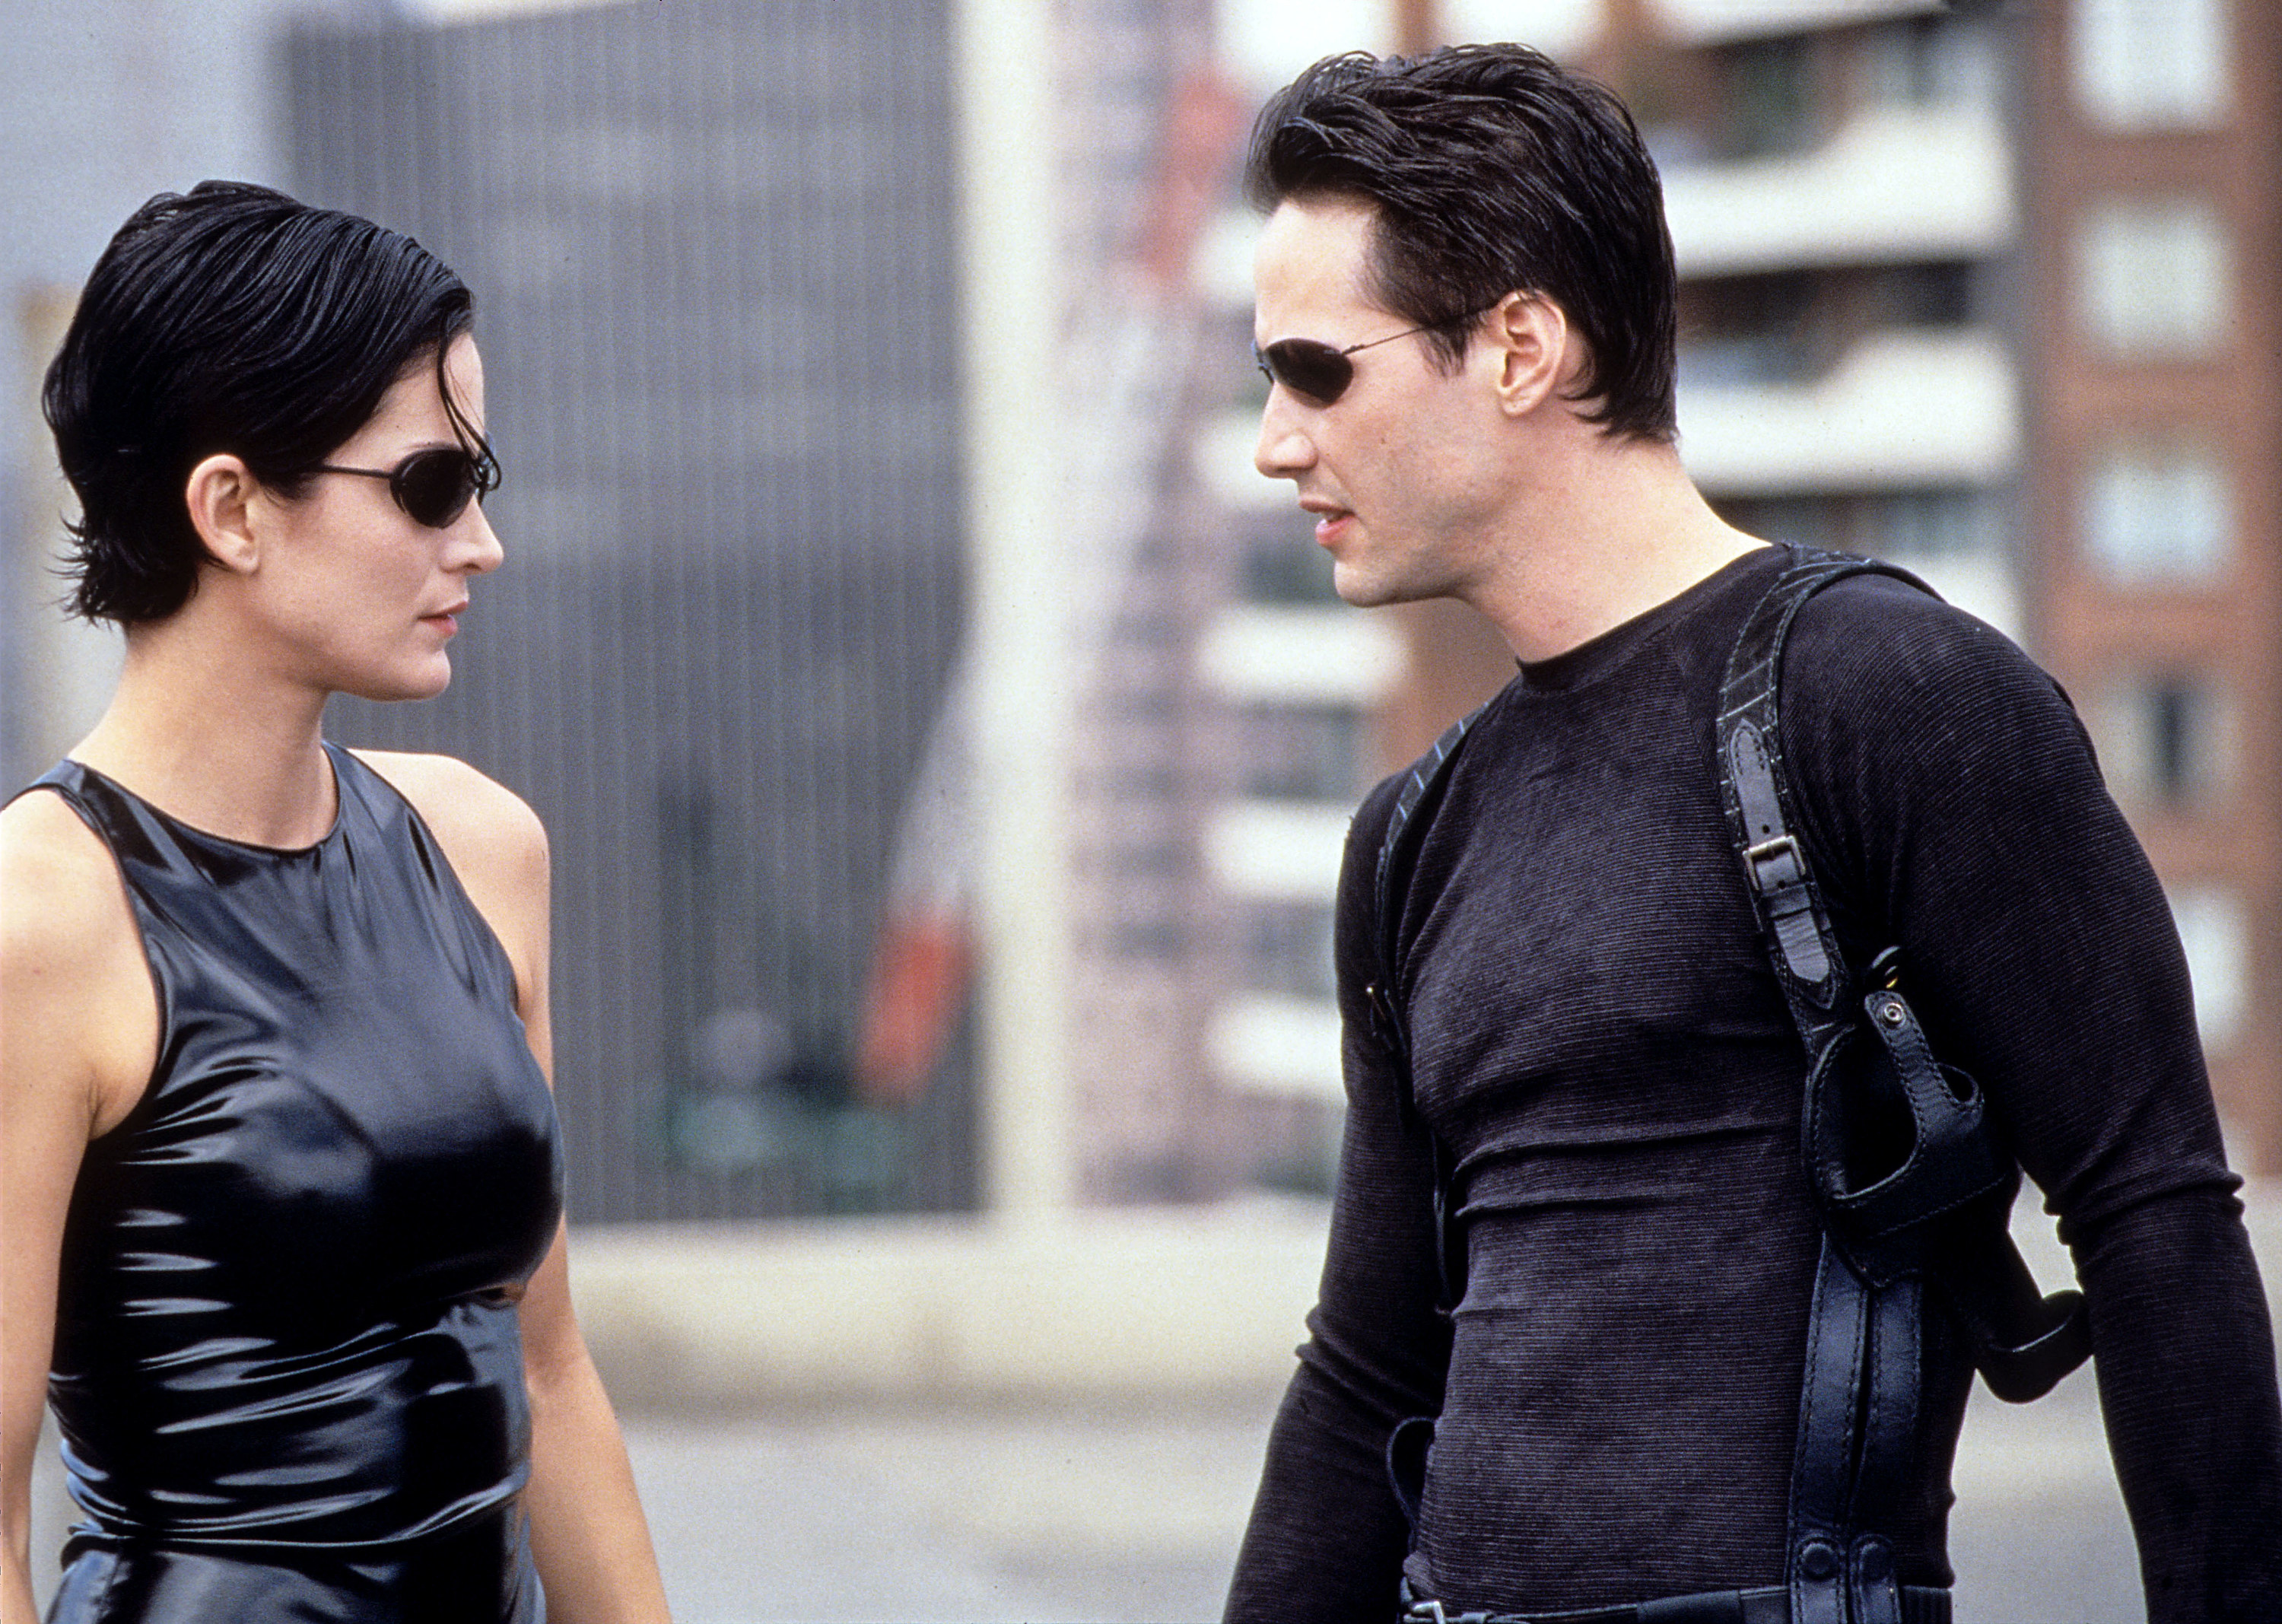 Trinity and Neo in the Matrix